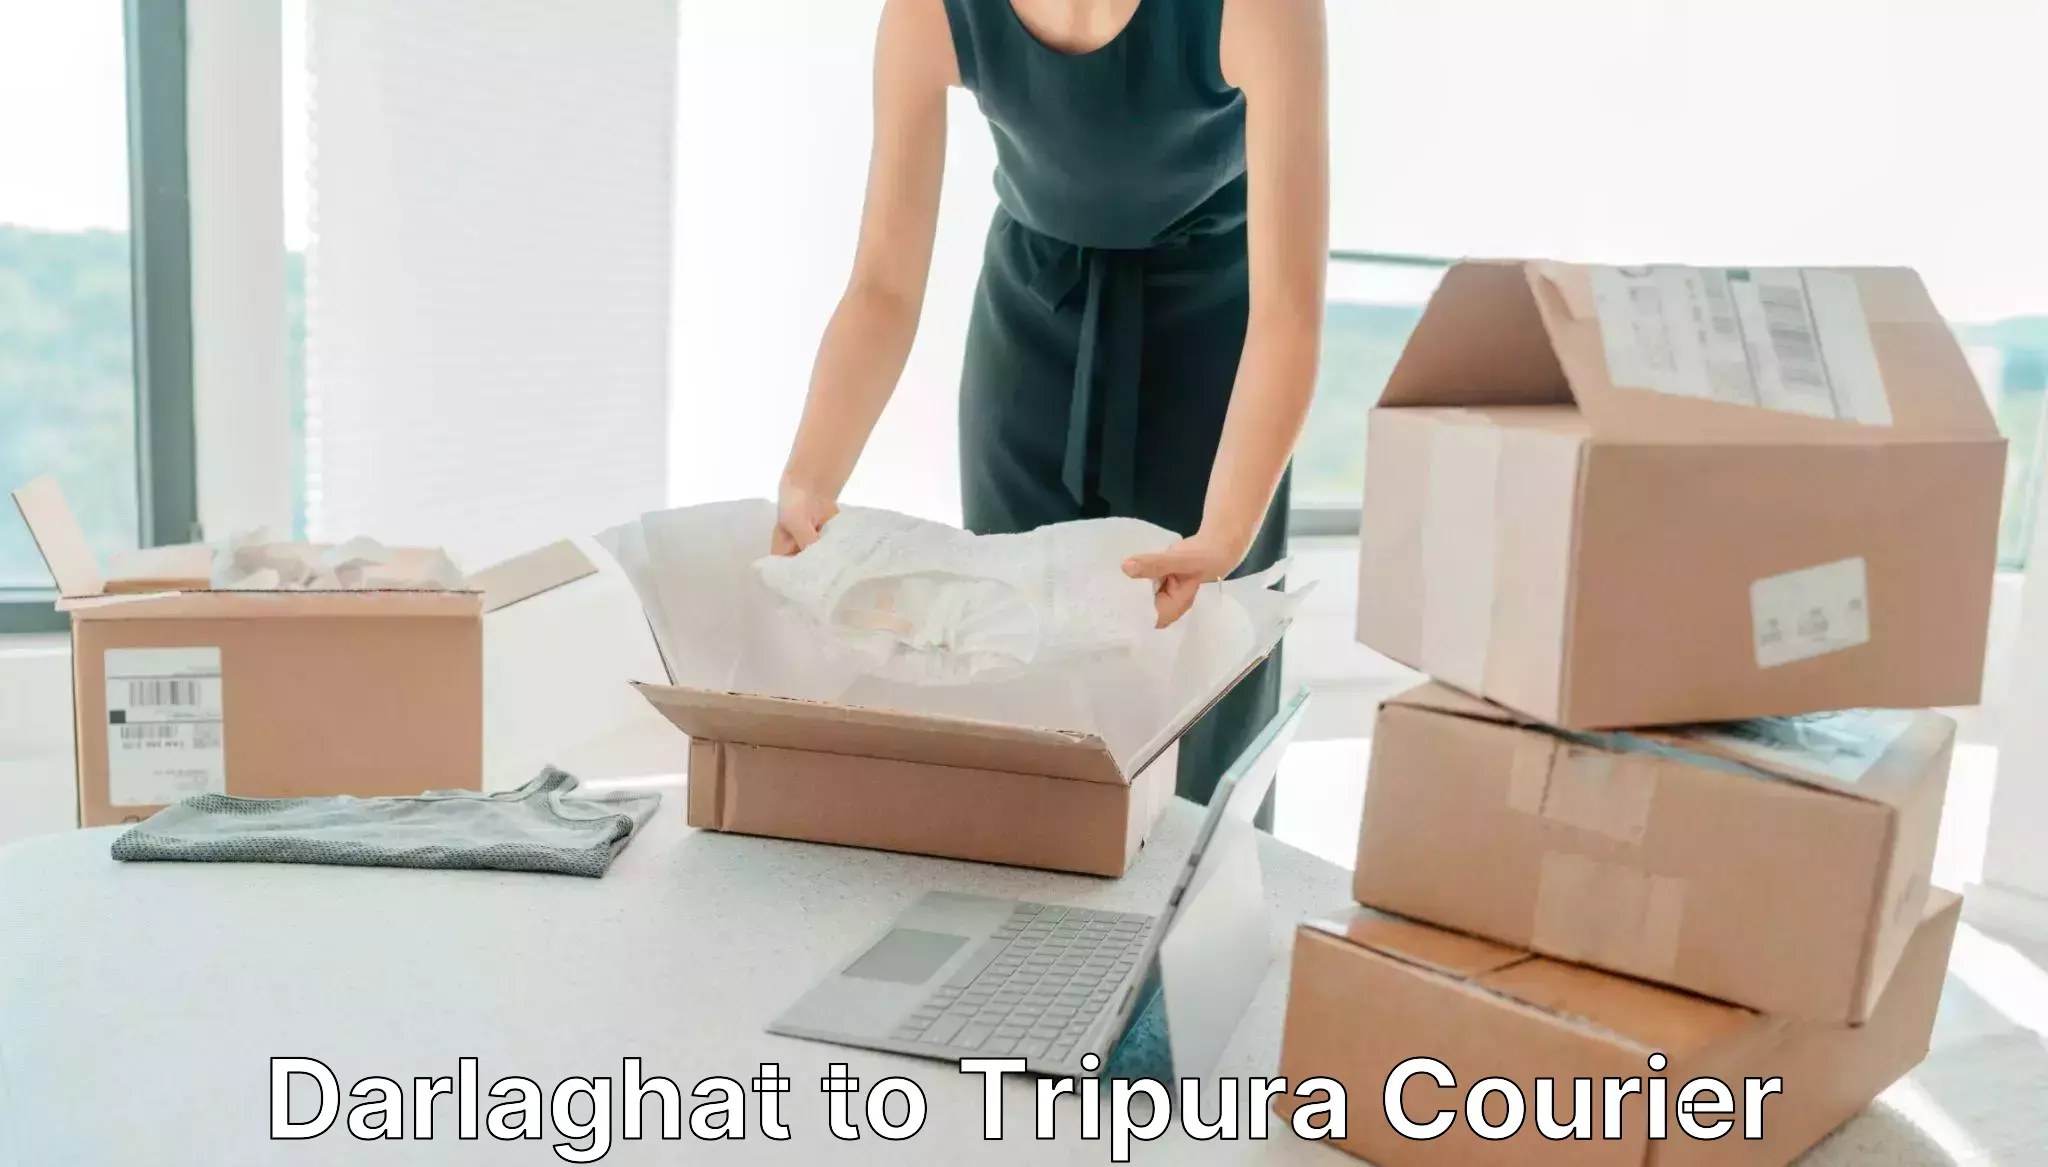 Customer-focused courier Darlaghat to Tripura